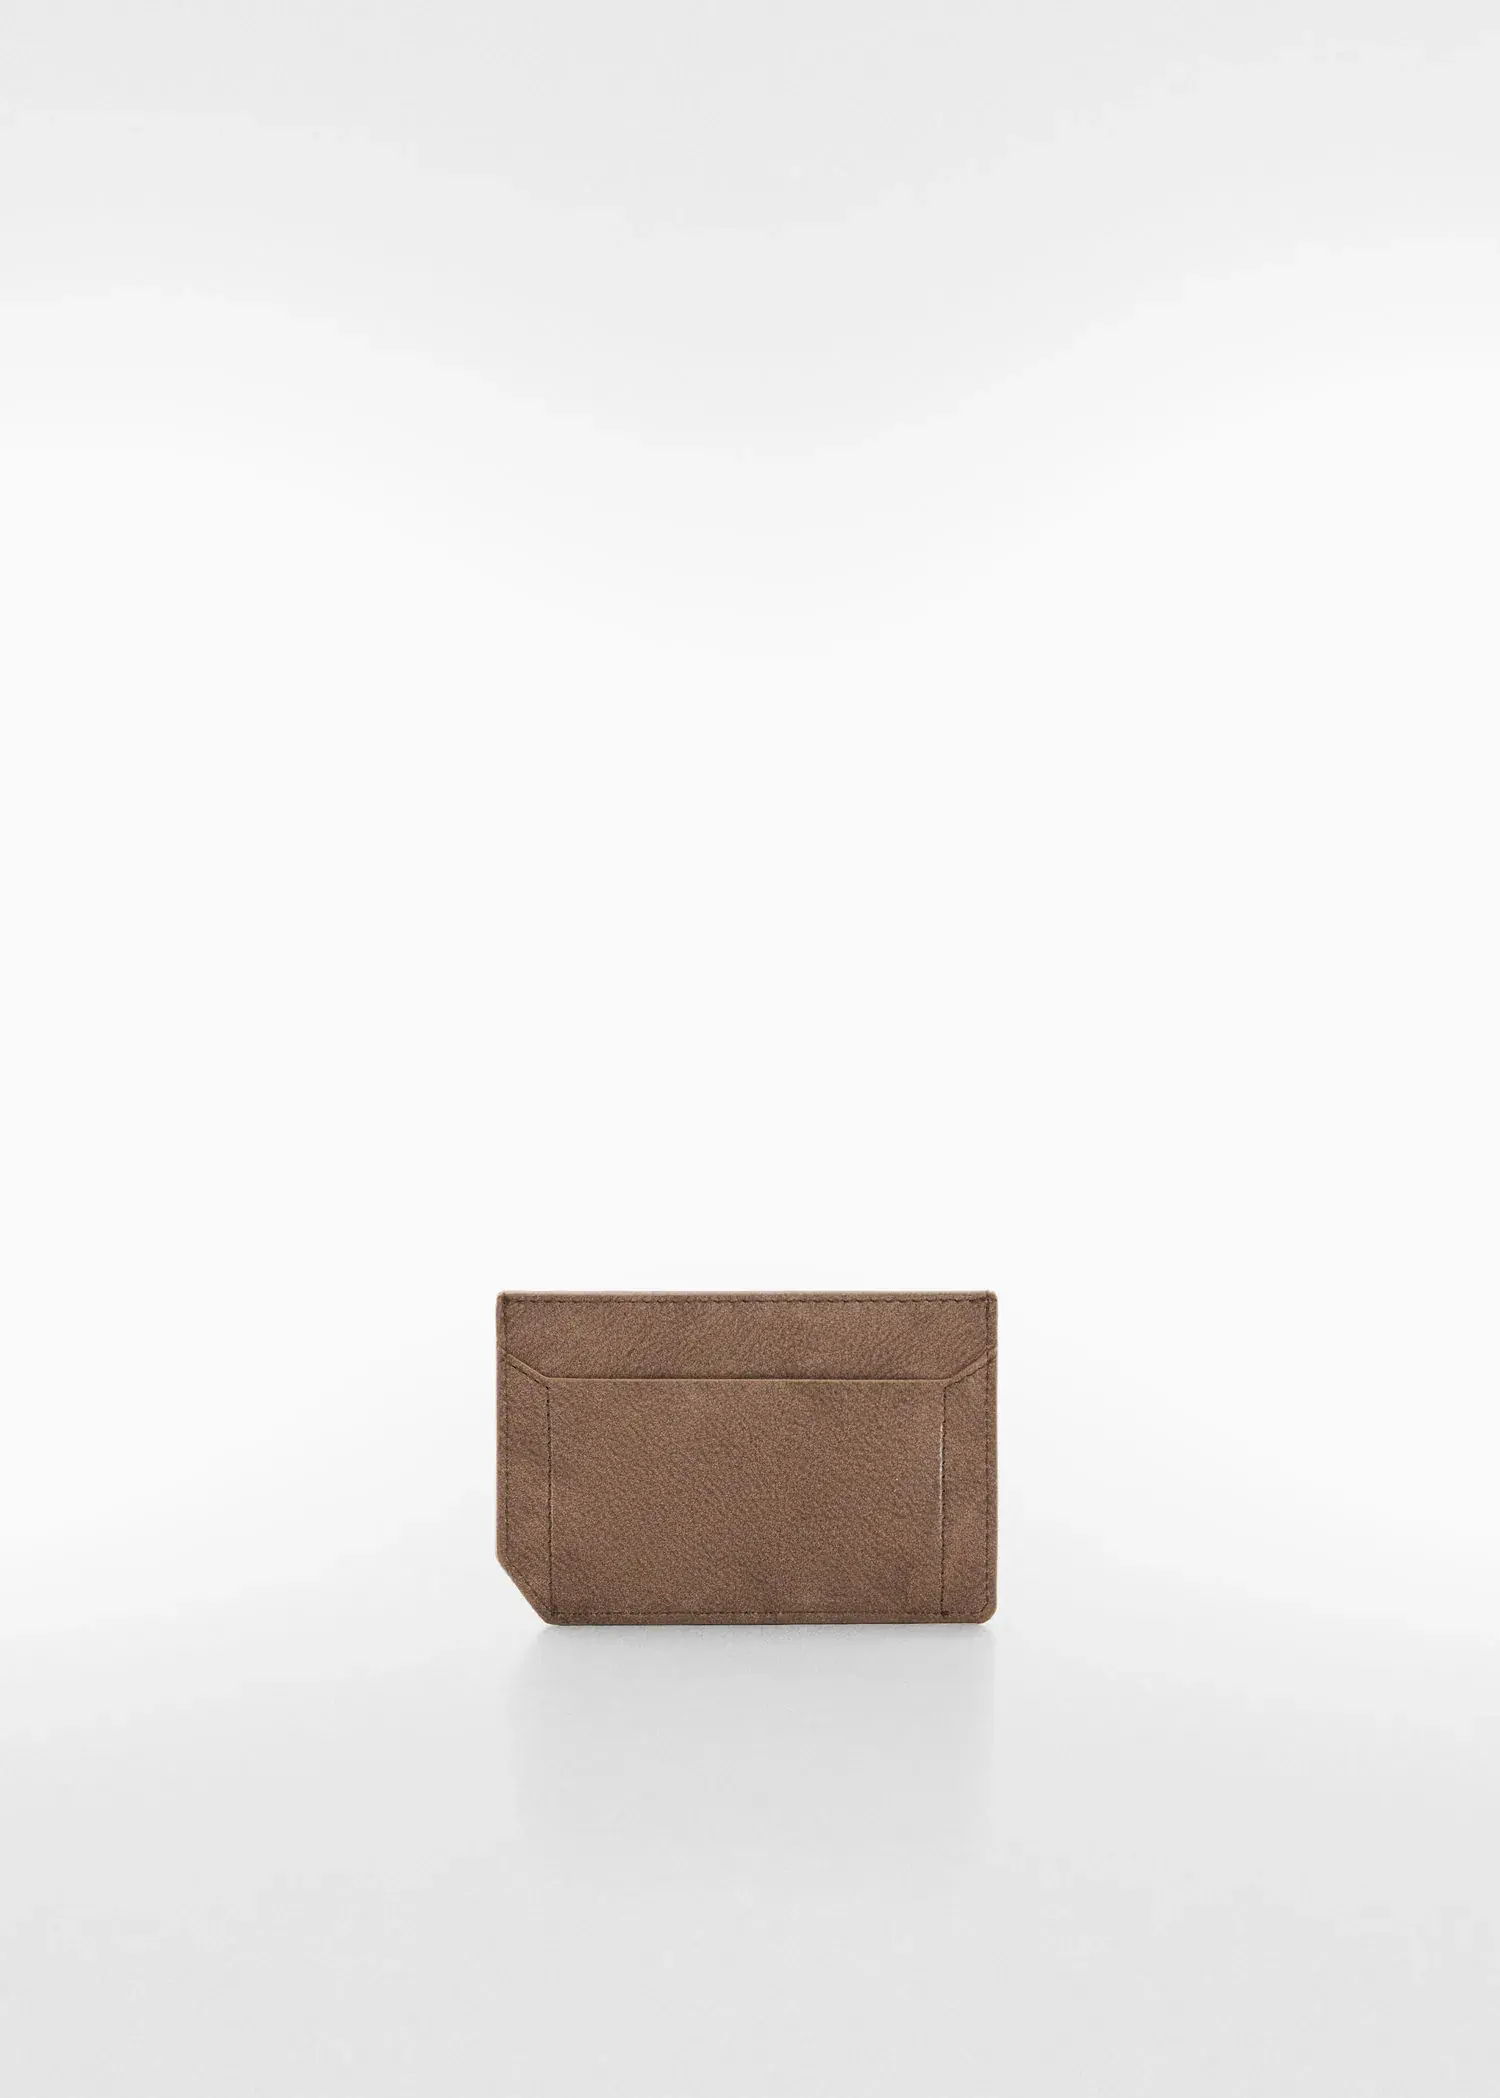 Mango Anti-contactless leather-effect card holder. 3